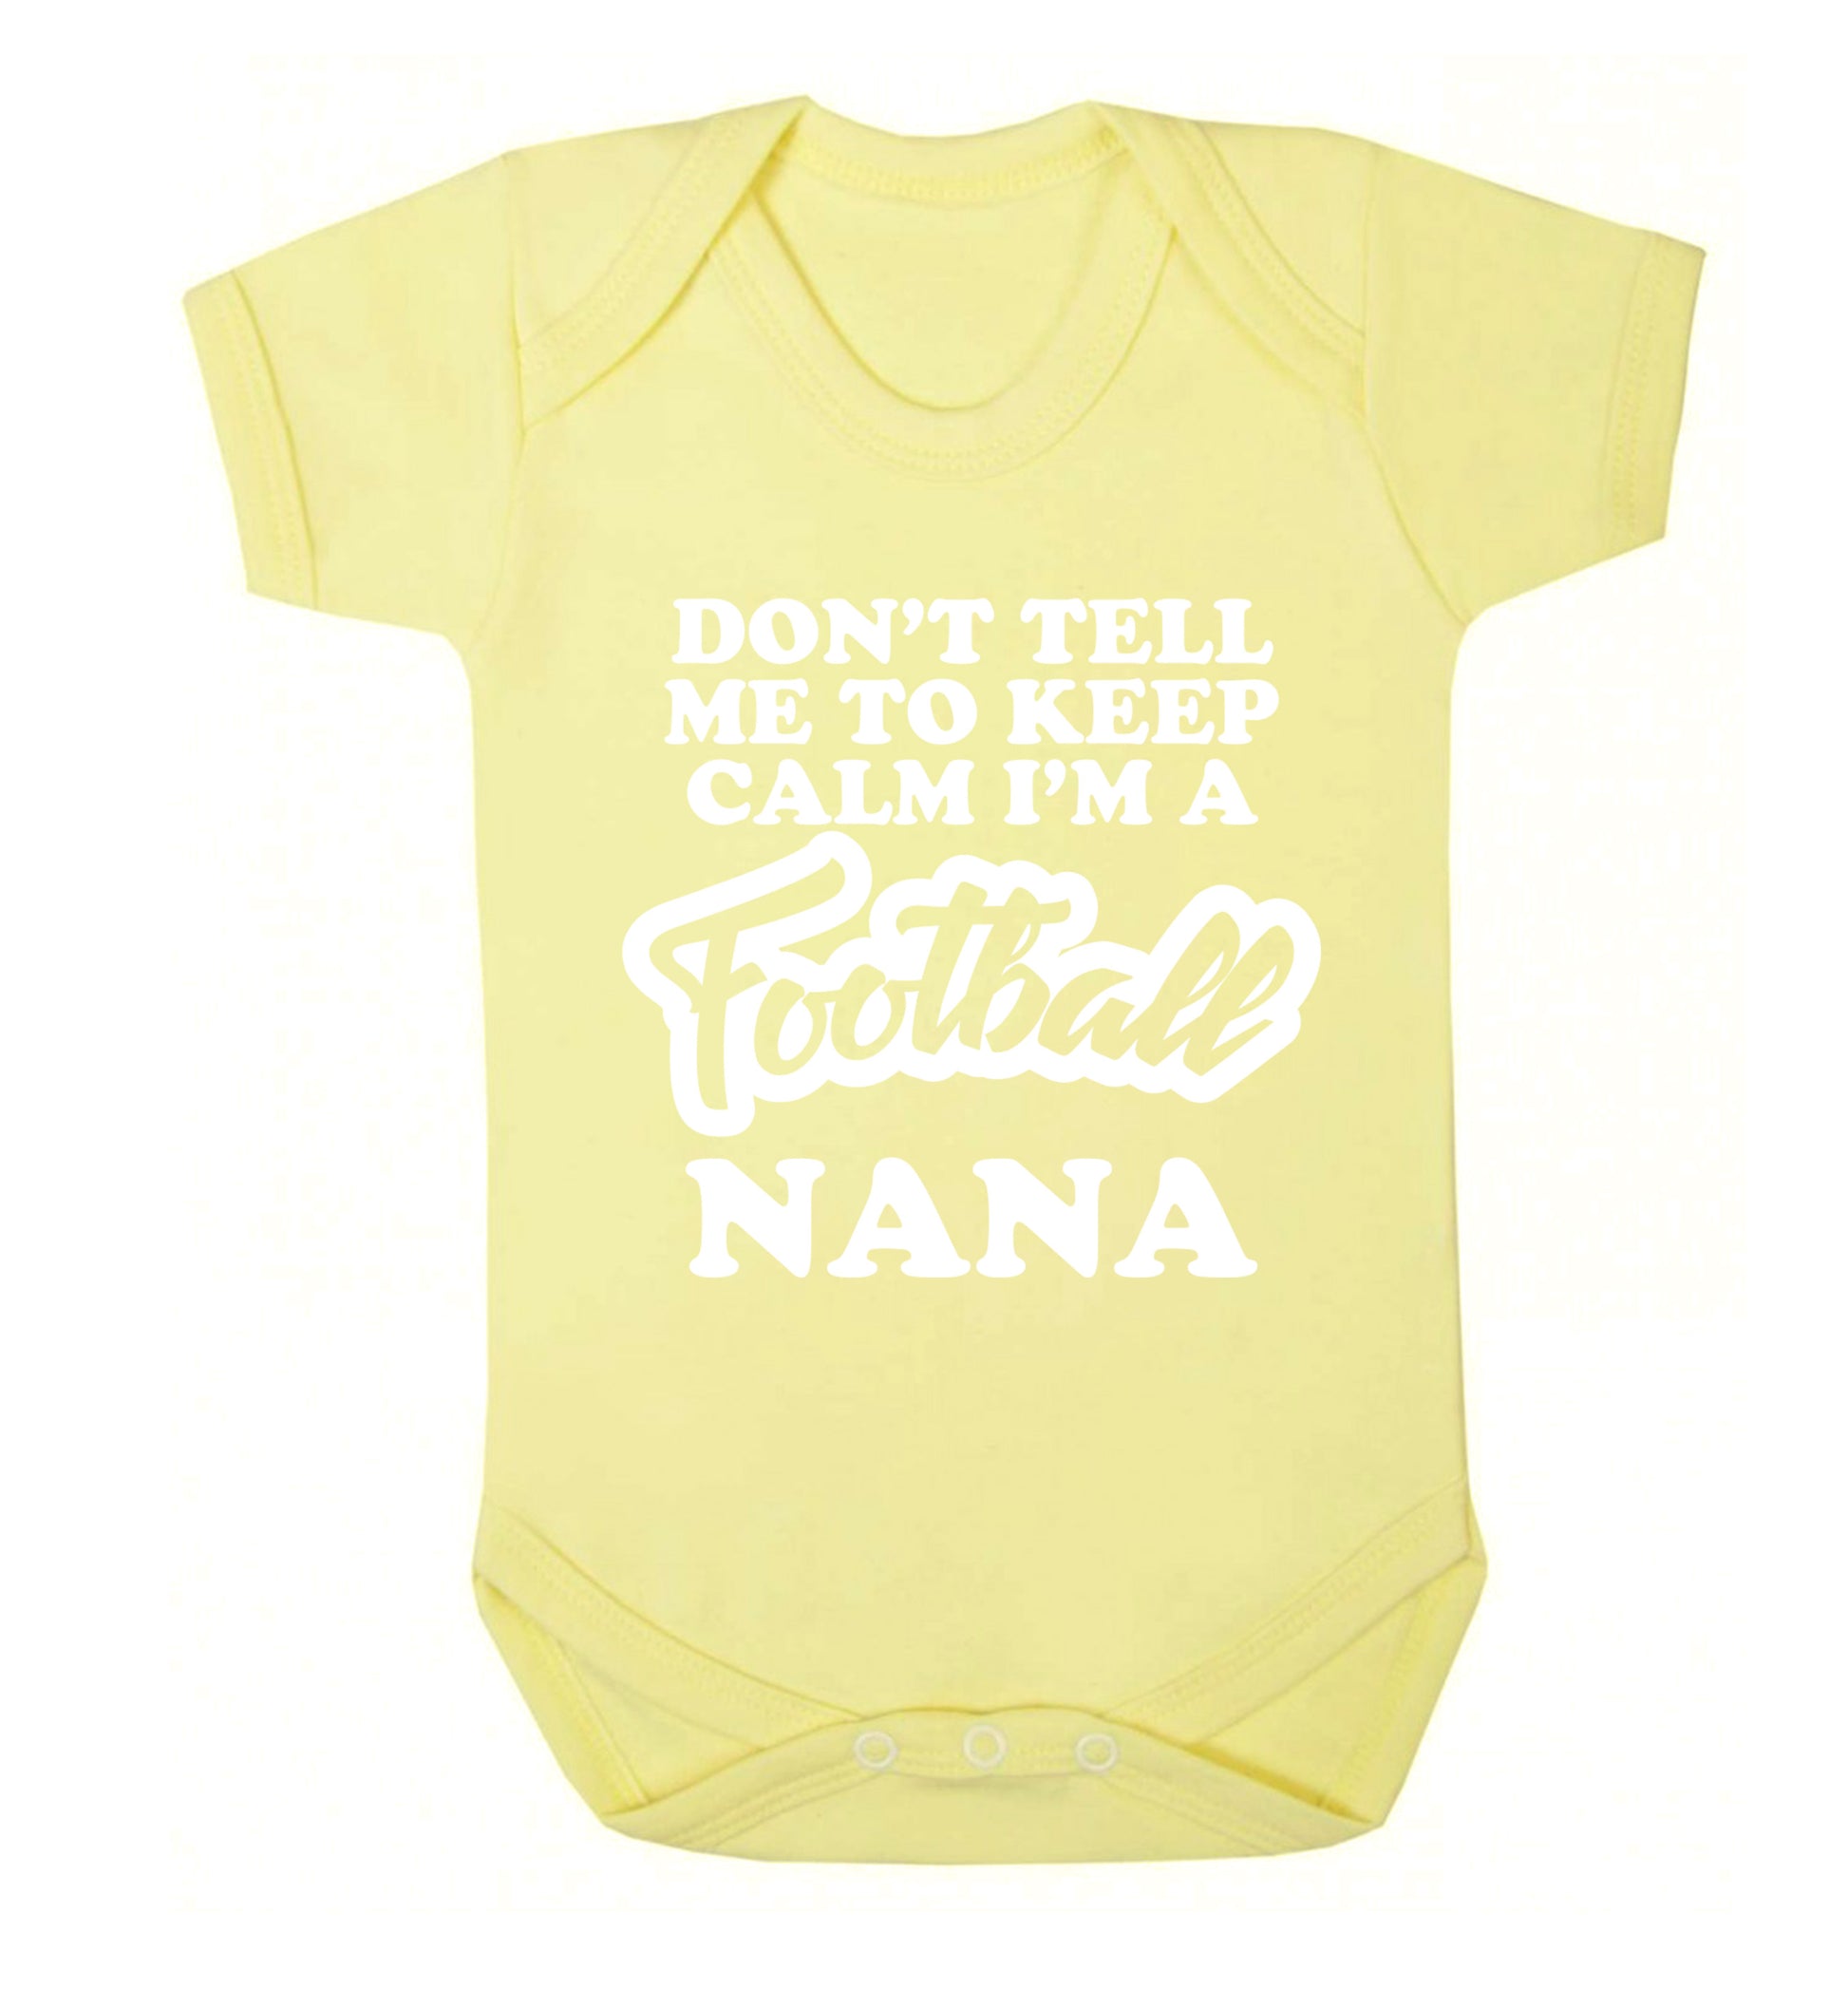 Don't tell me to keep calm I'm a football nana Baby Vest pale yellow 18-24 months